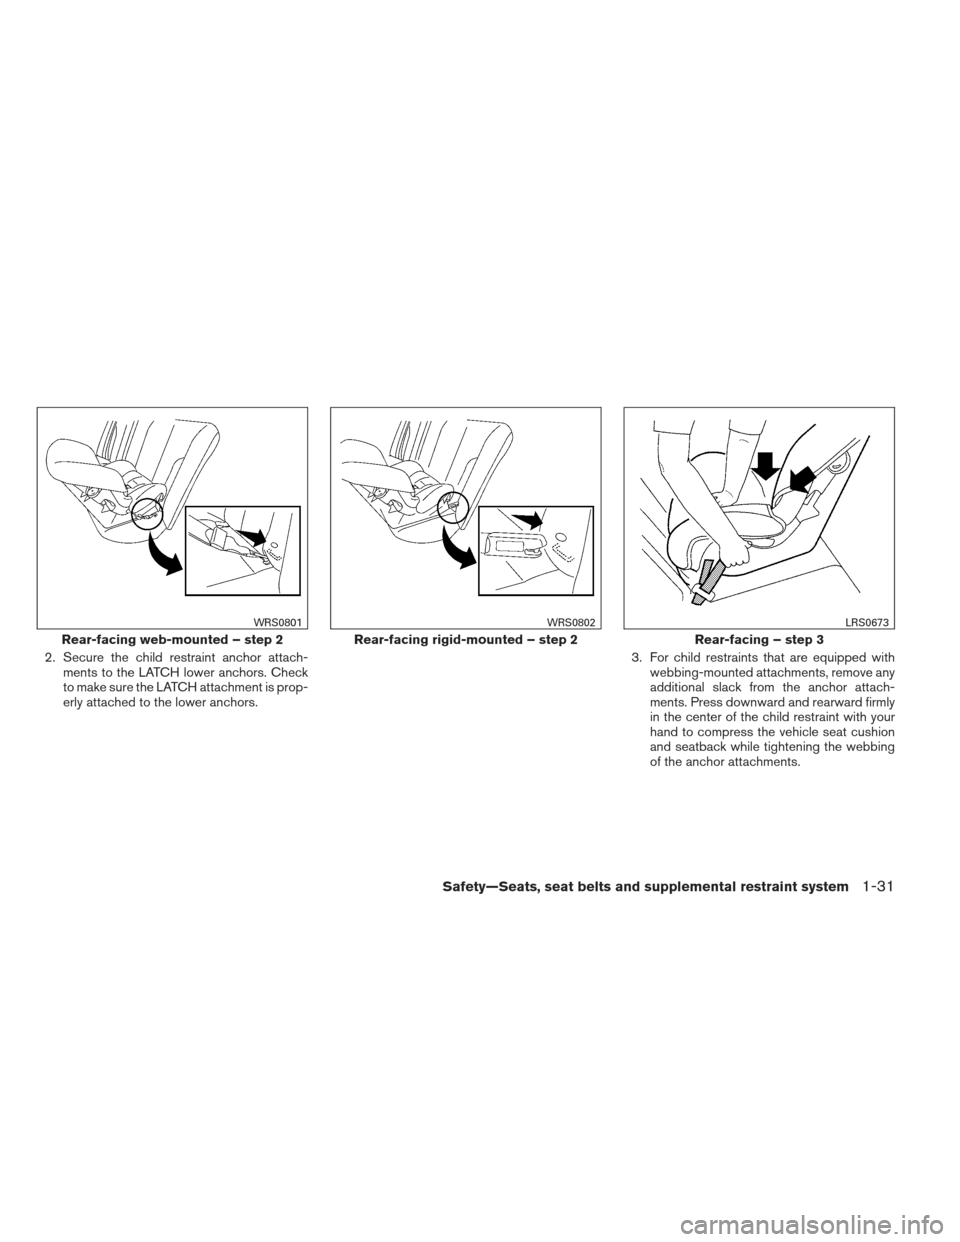 NISSAN FRONTIER 2013 D40 / 2.G Service Manual 2. Secure the child restraint anchor attach-ments to the LATCH lower anchors. Check
to make sure the LATCH attachment is prop-
erly attached to the lower anchors. 3. For child restraints that are equi